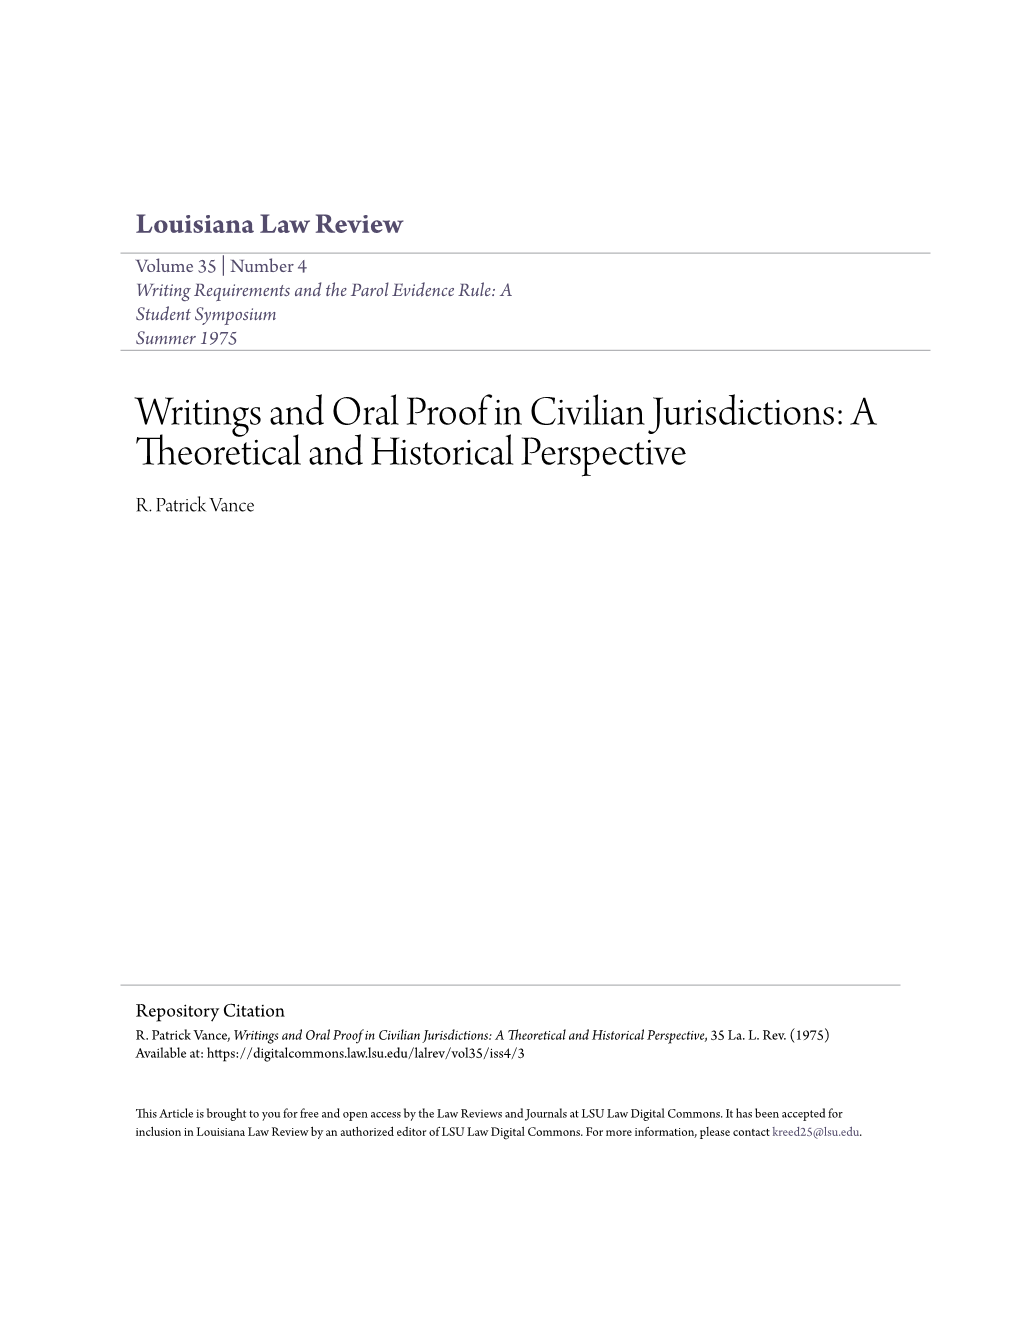 Writings and Oral Proof in Civilian Jurisdictions: a Theoretical and Historical Perspective R